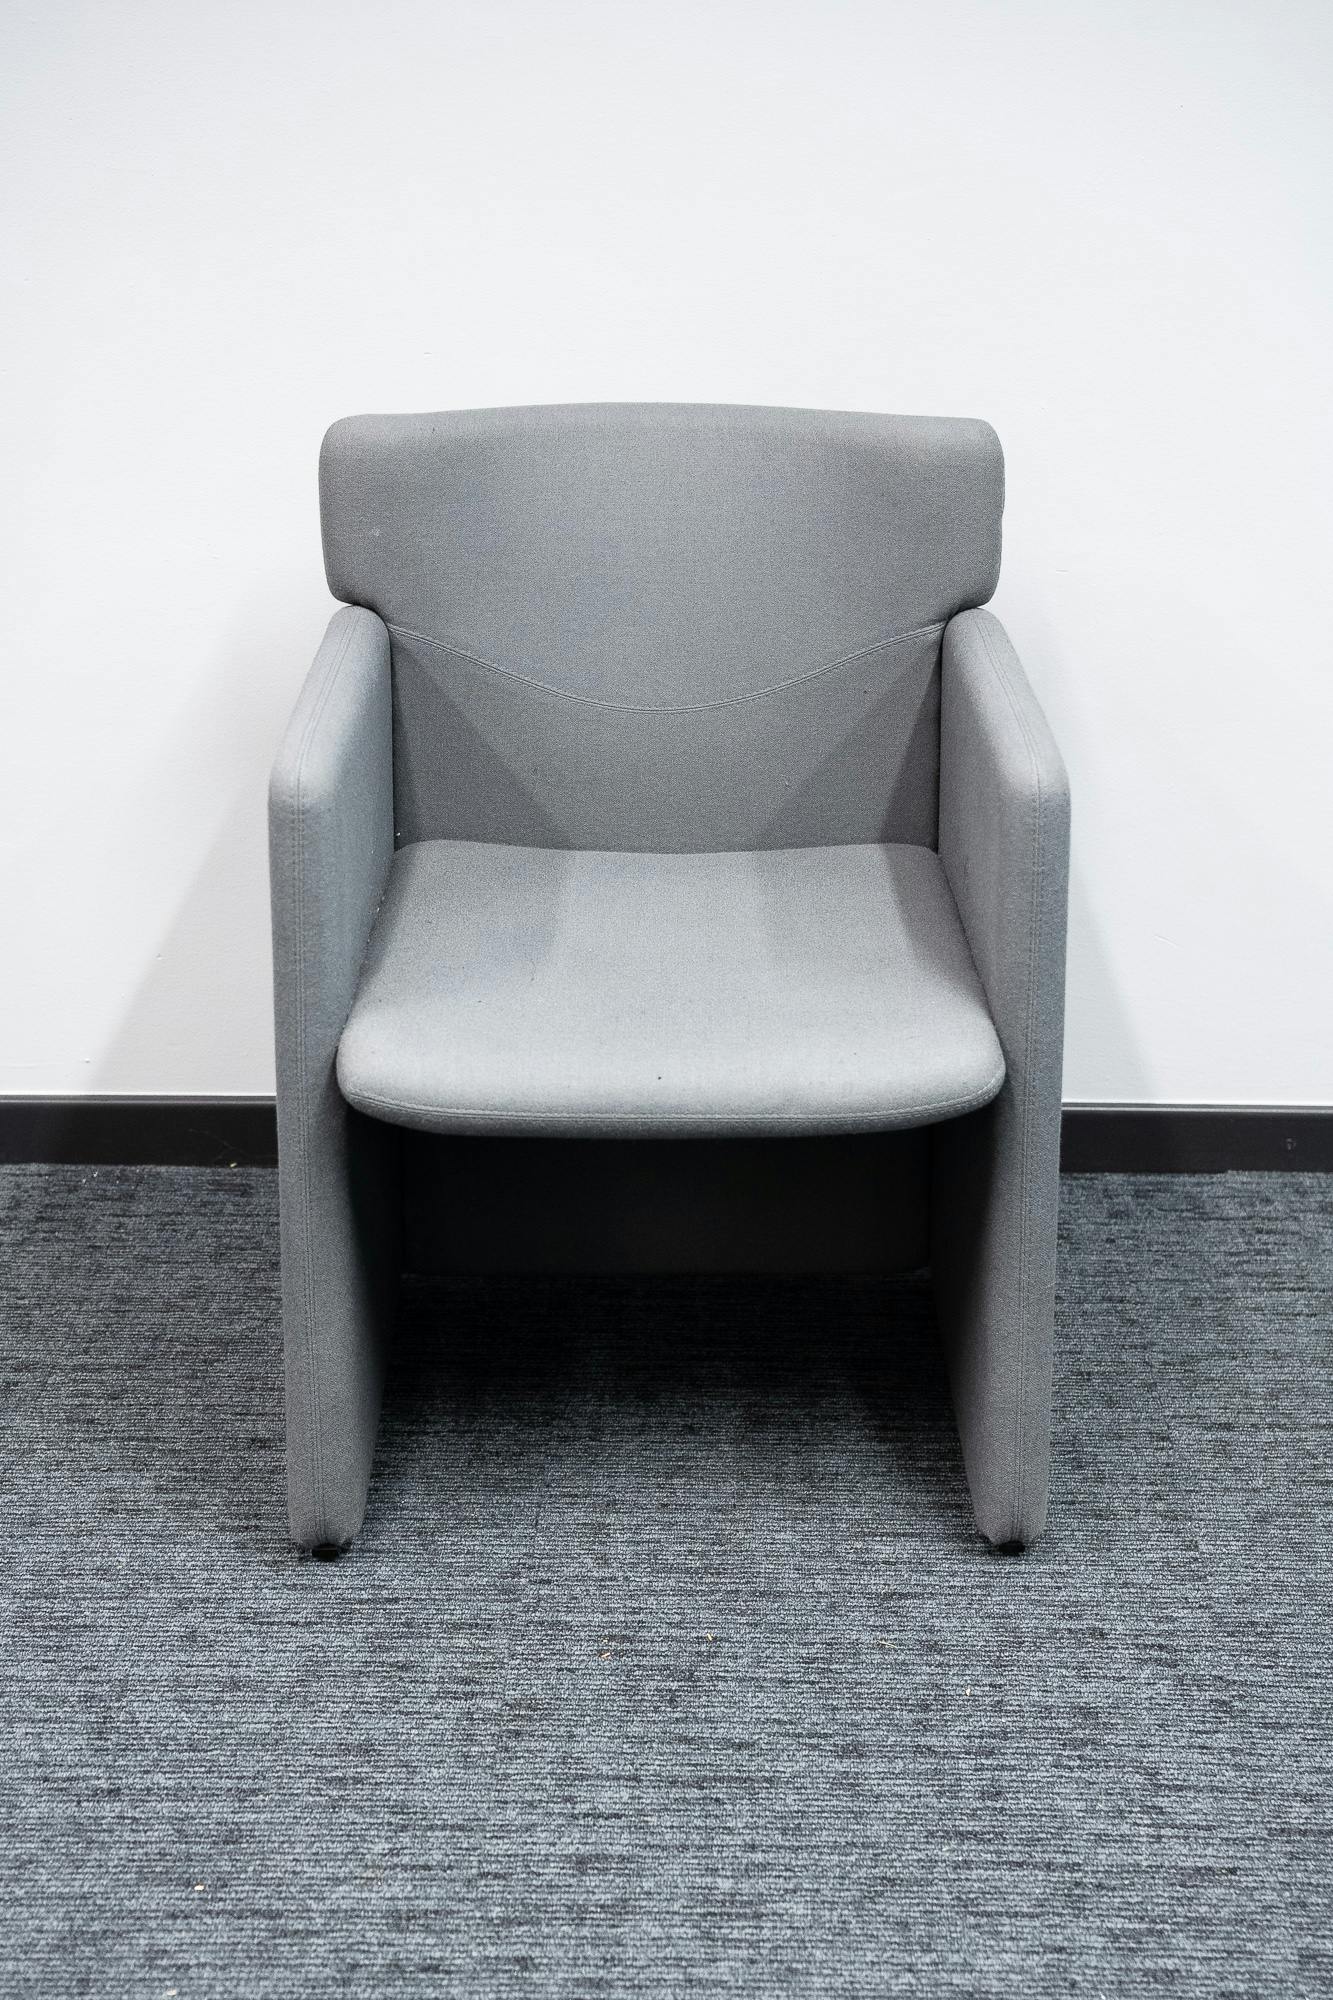 1-seater grey fabric armchair - Relieve Furniture